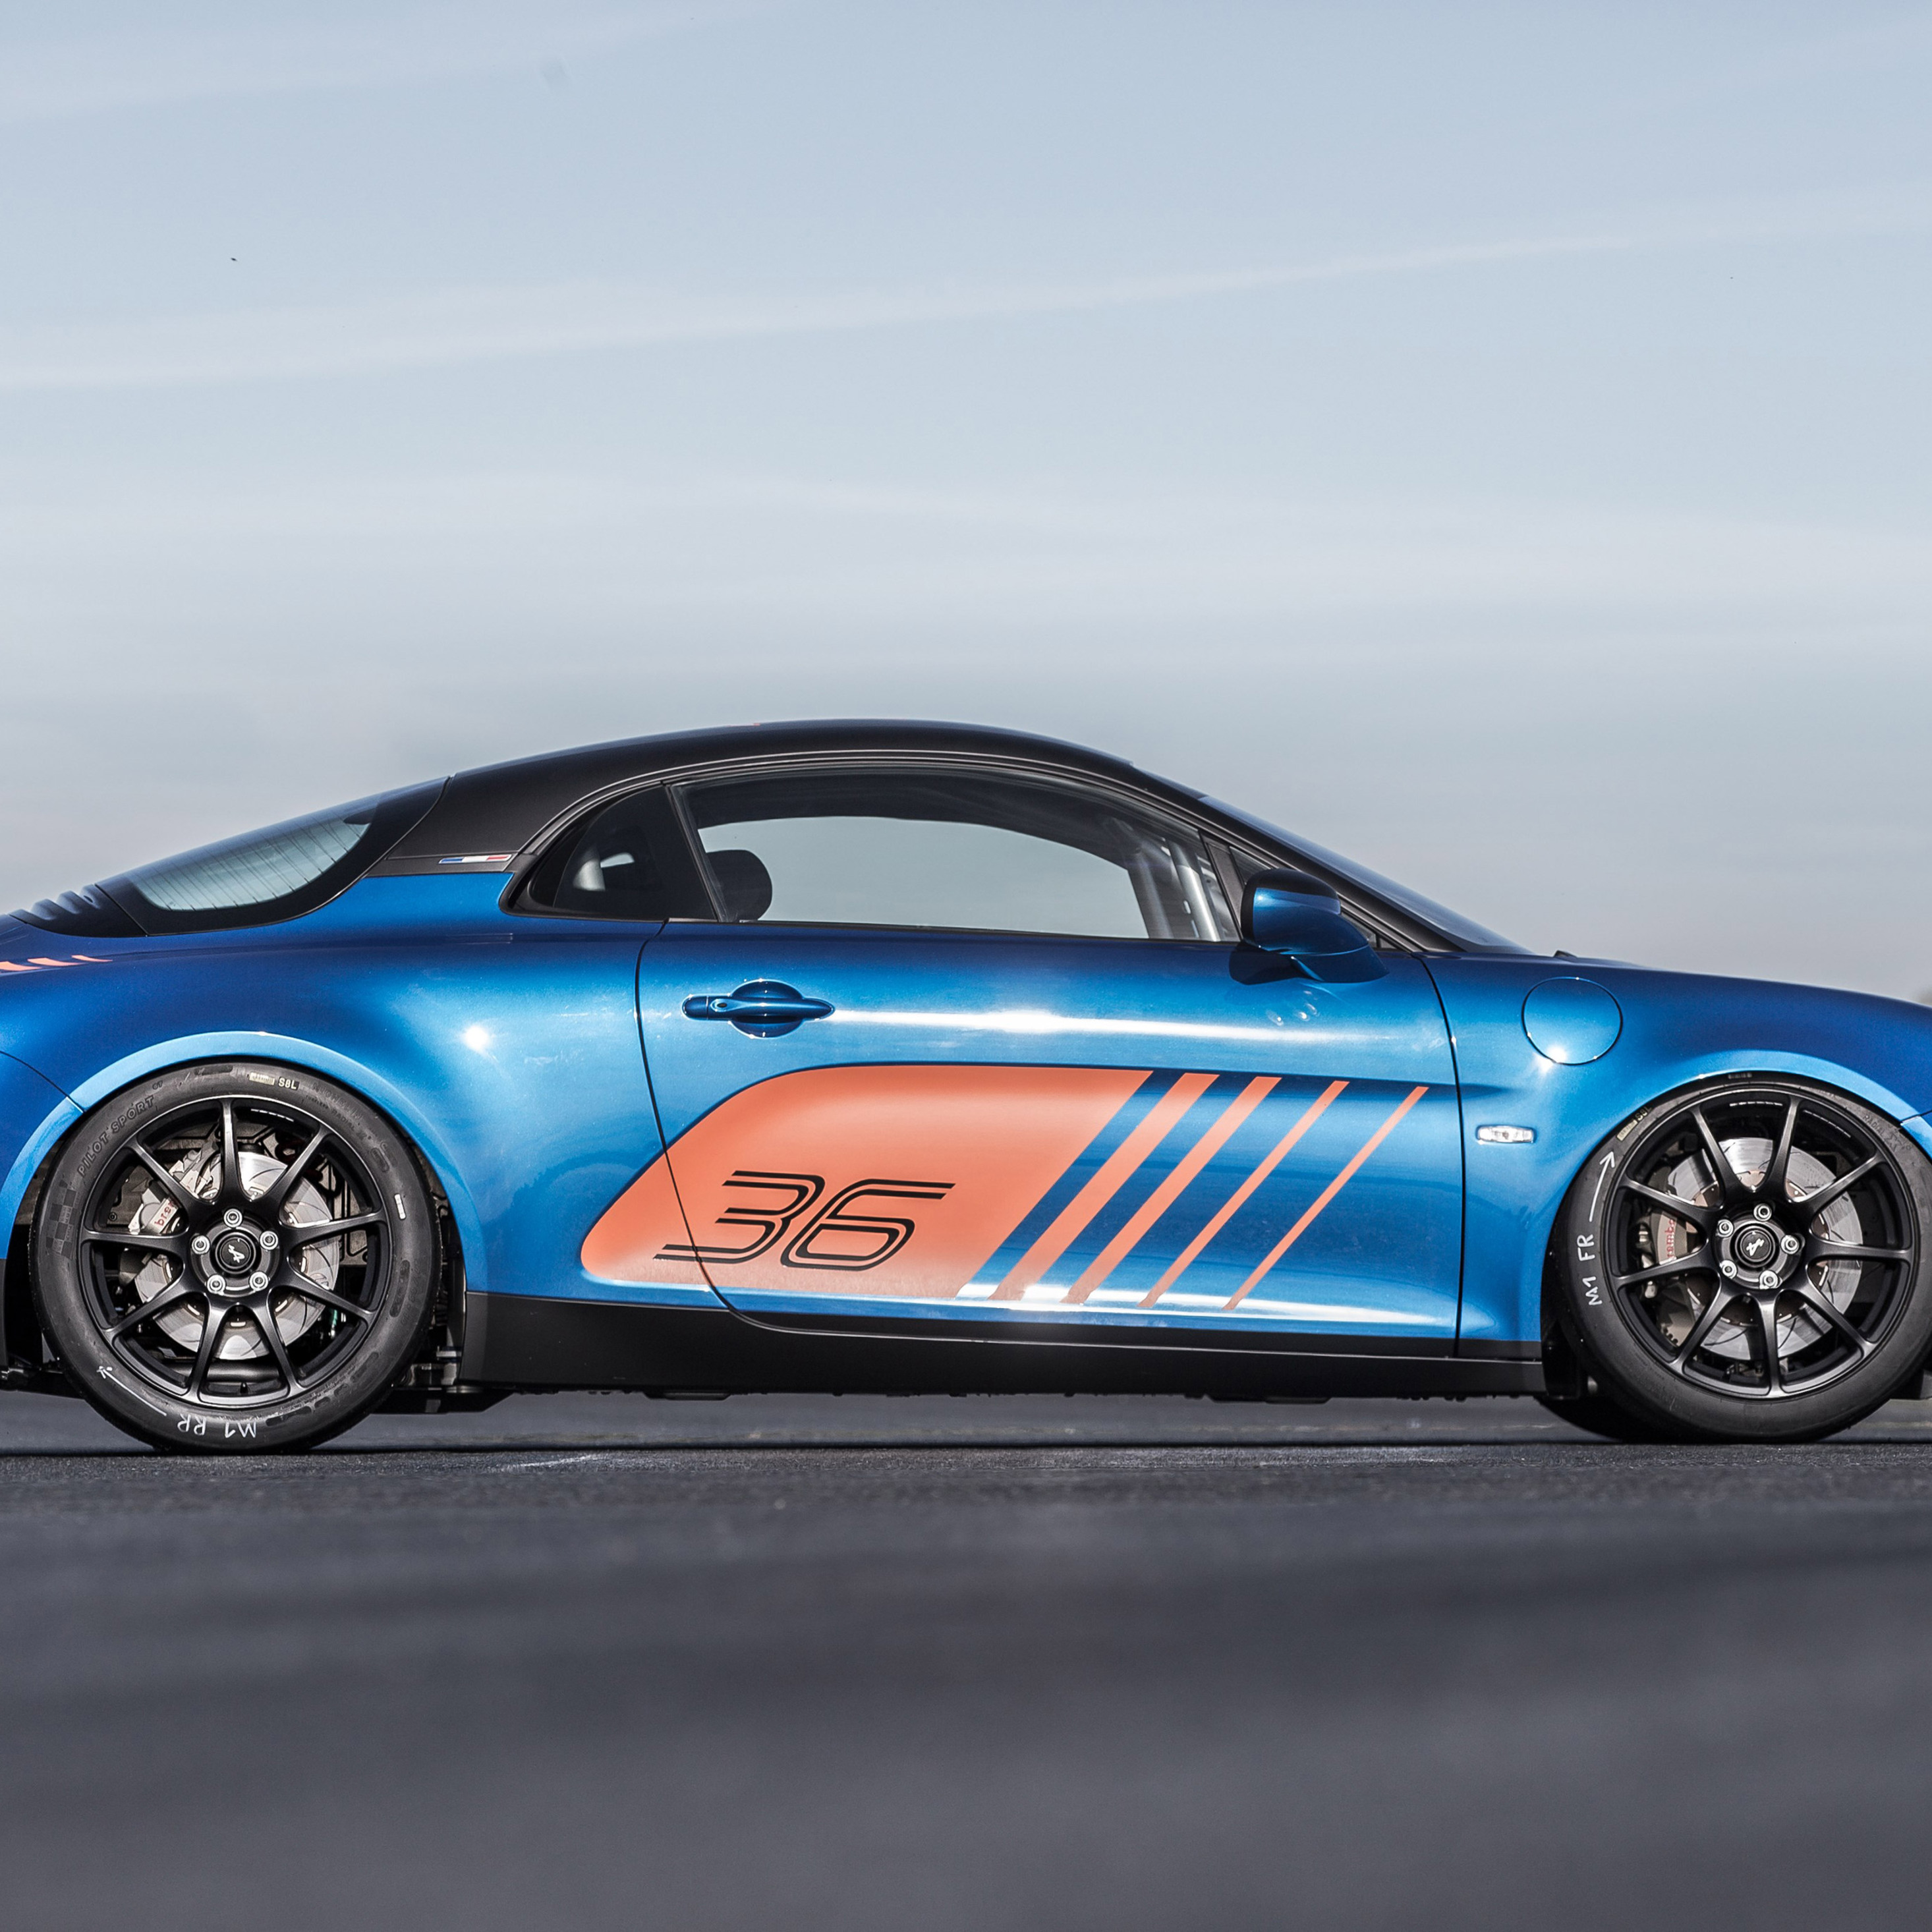 Alpine A110 Wallpapers